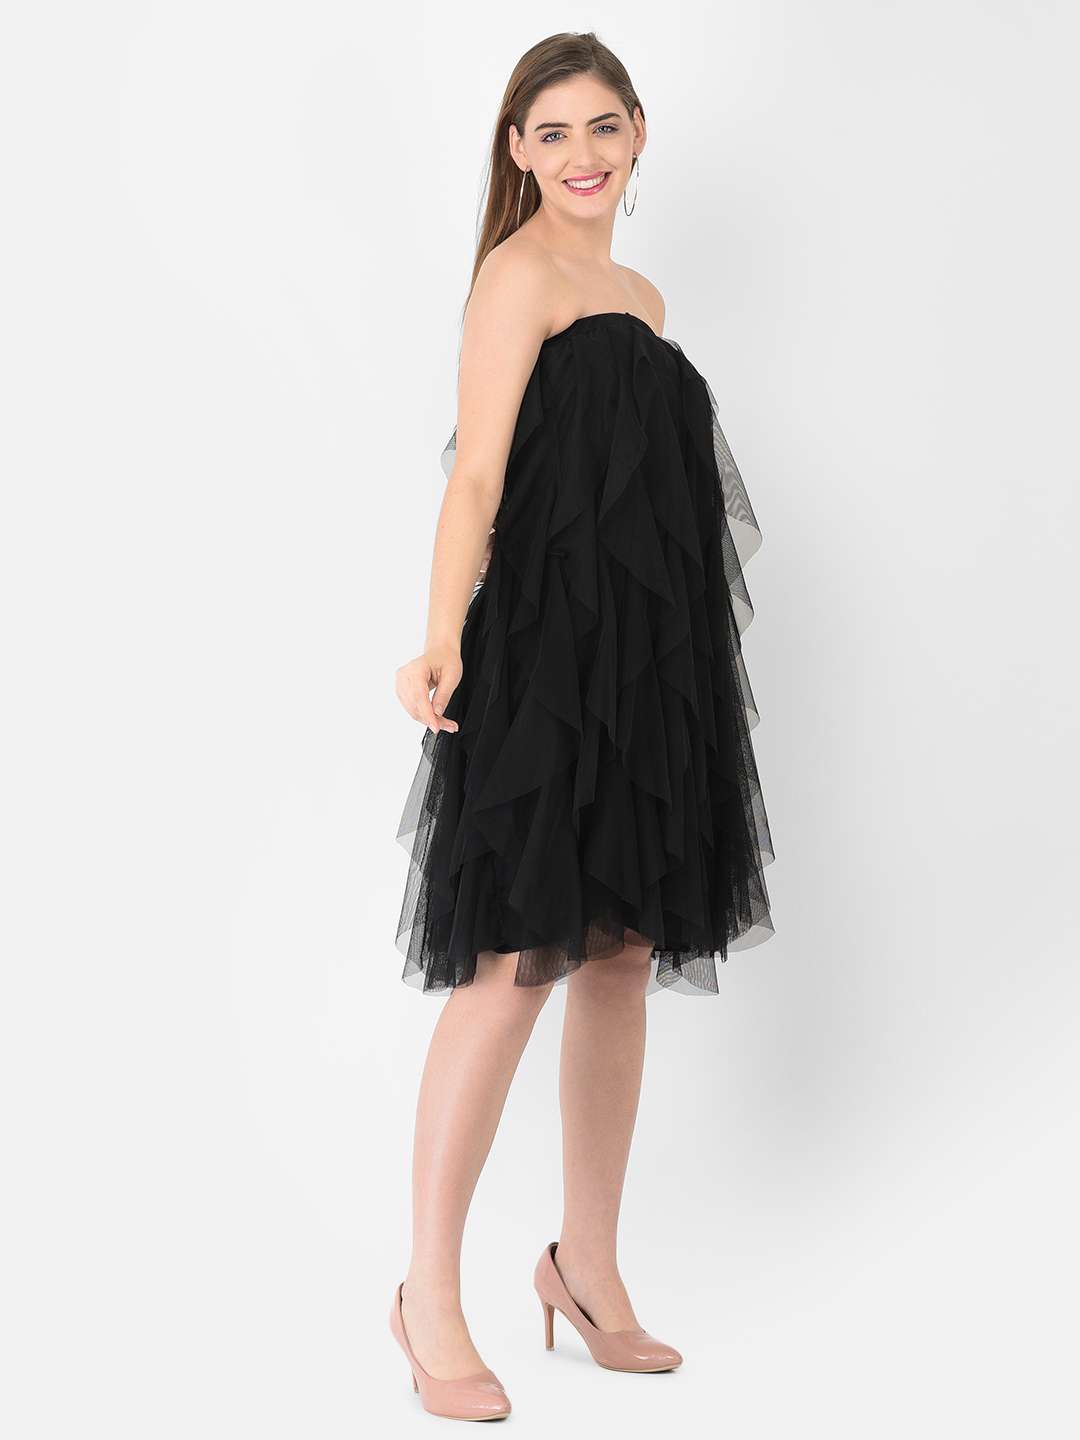 Yummie Strapless Convertible Tube Dress And Skirt In Black | Adrianna Papell